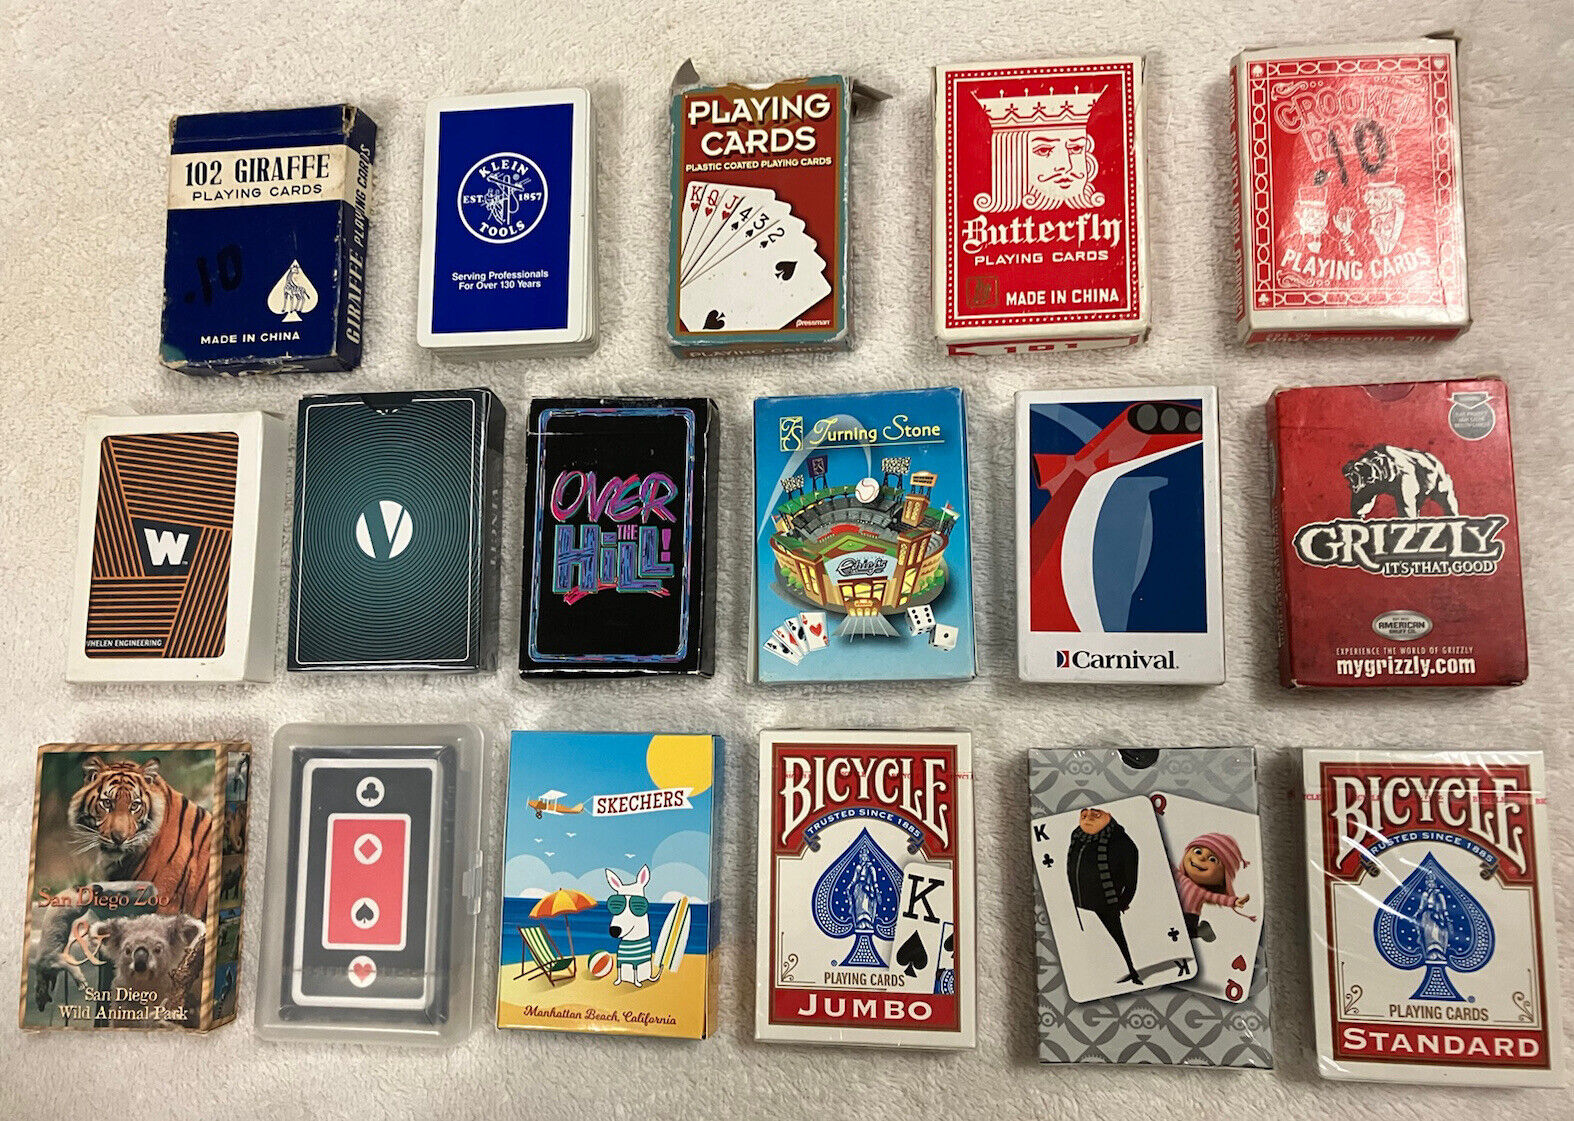 17 Decks of Playing Cards Lot -Poker Blackjack Butterfly Giraffe Minions Grizzly